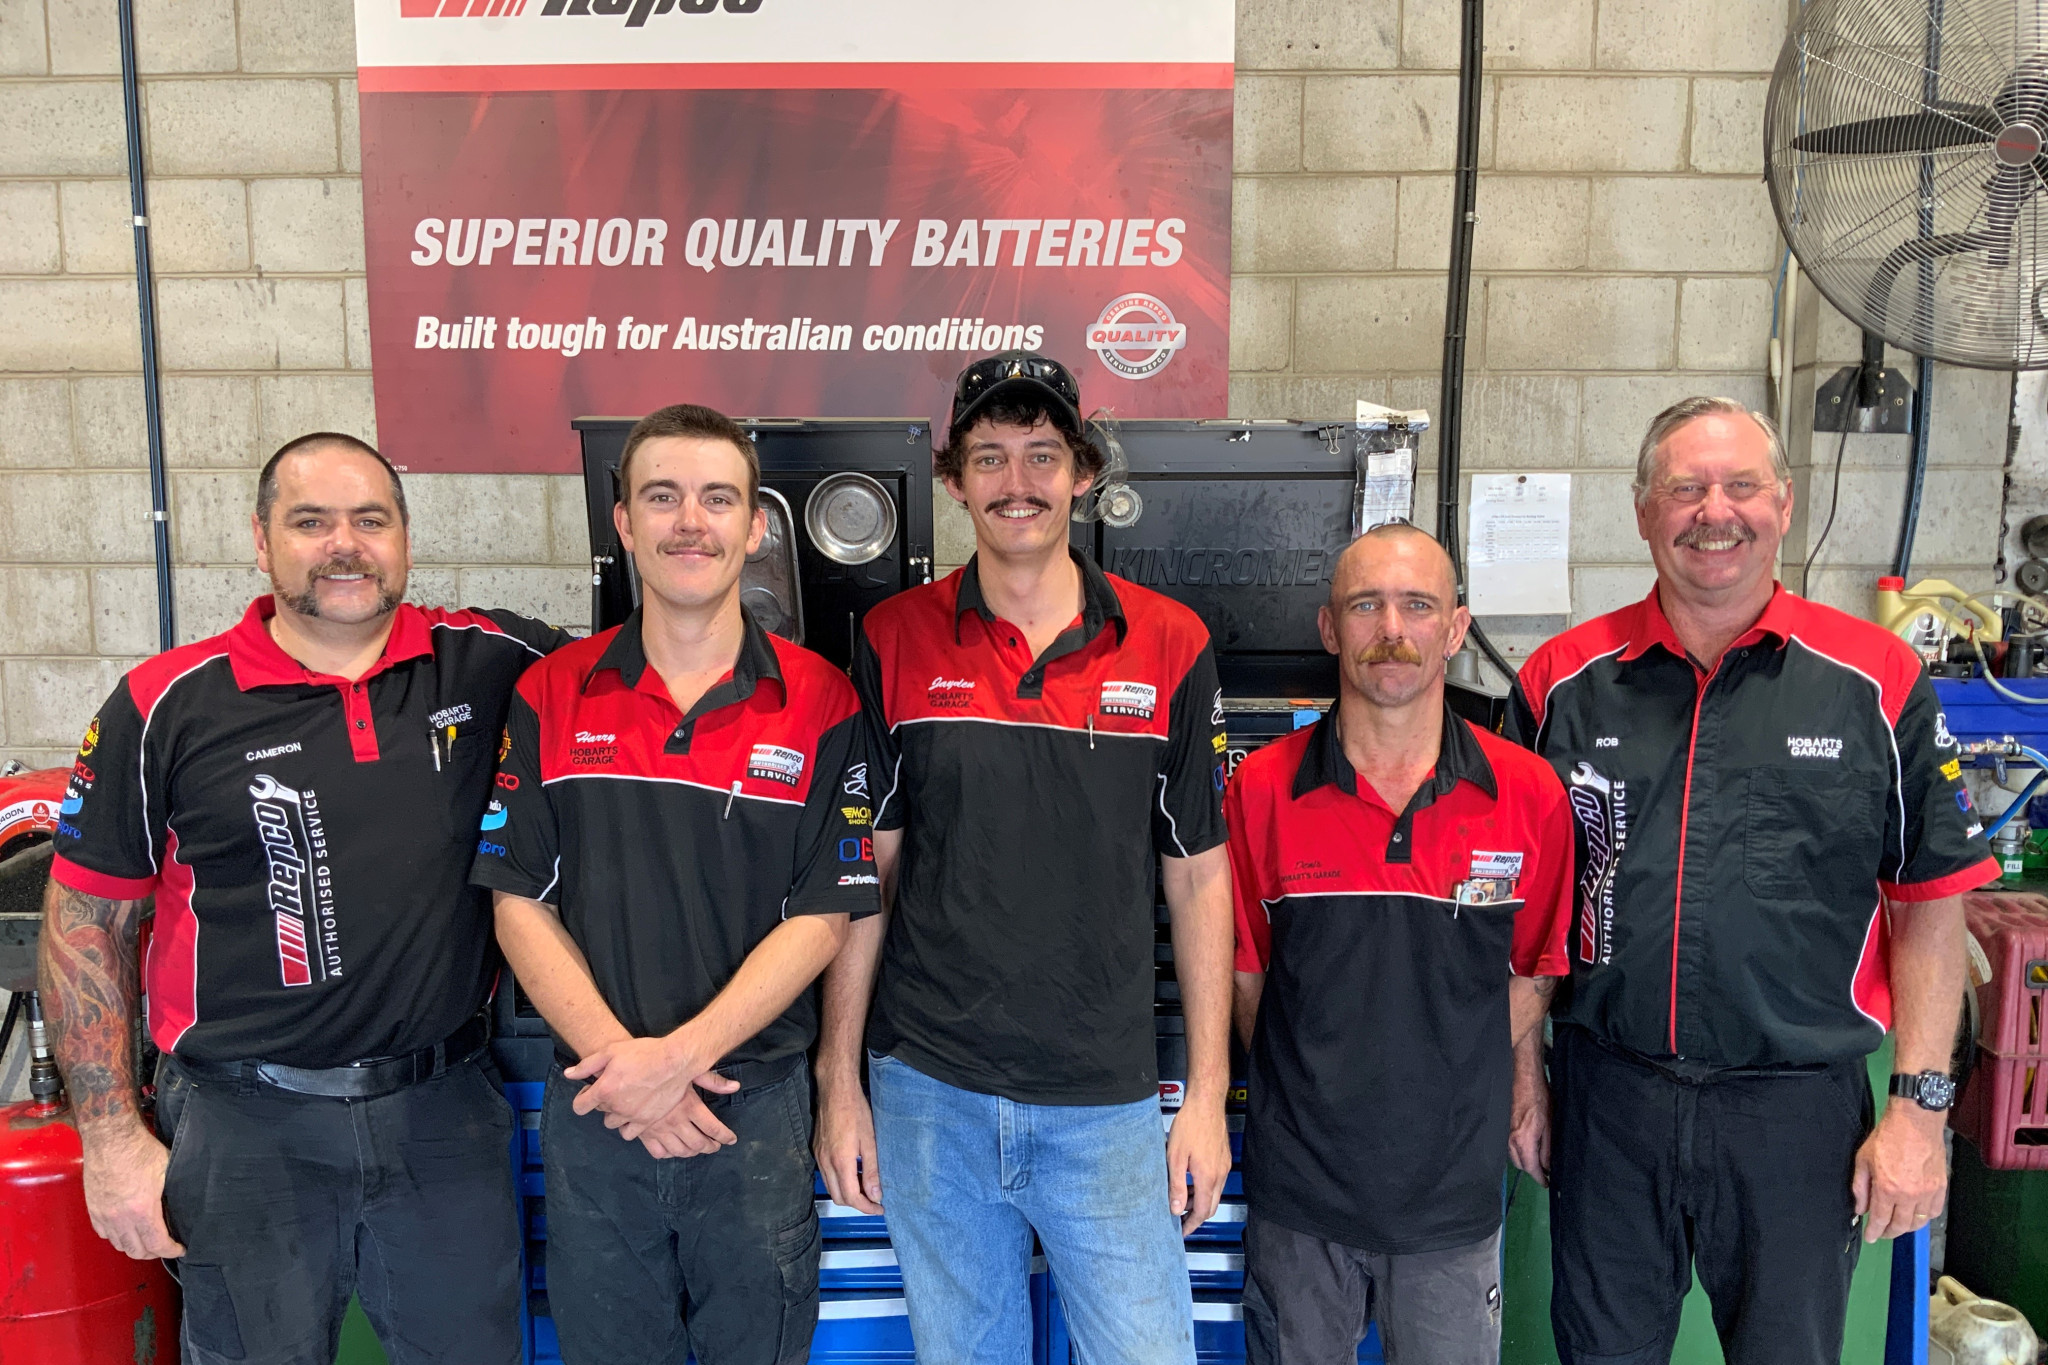 The Hobart’s Garage crew of Cameron Phillips, Harry Sinclair, Jayden Preece, Denis Ryan and Rob Vogler raised more than $1,000 as they played their part in Movember.